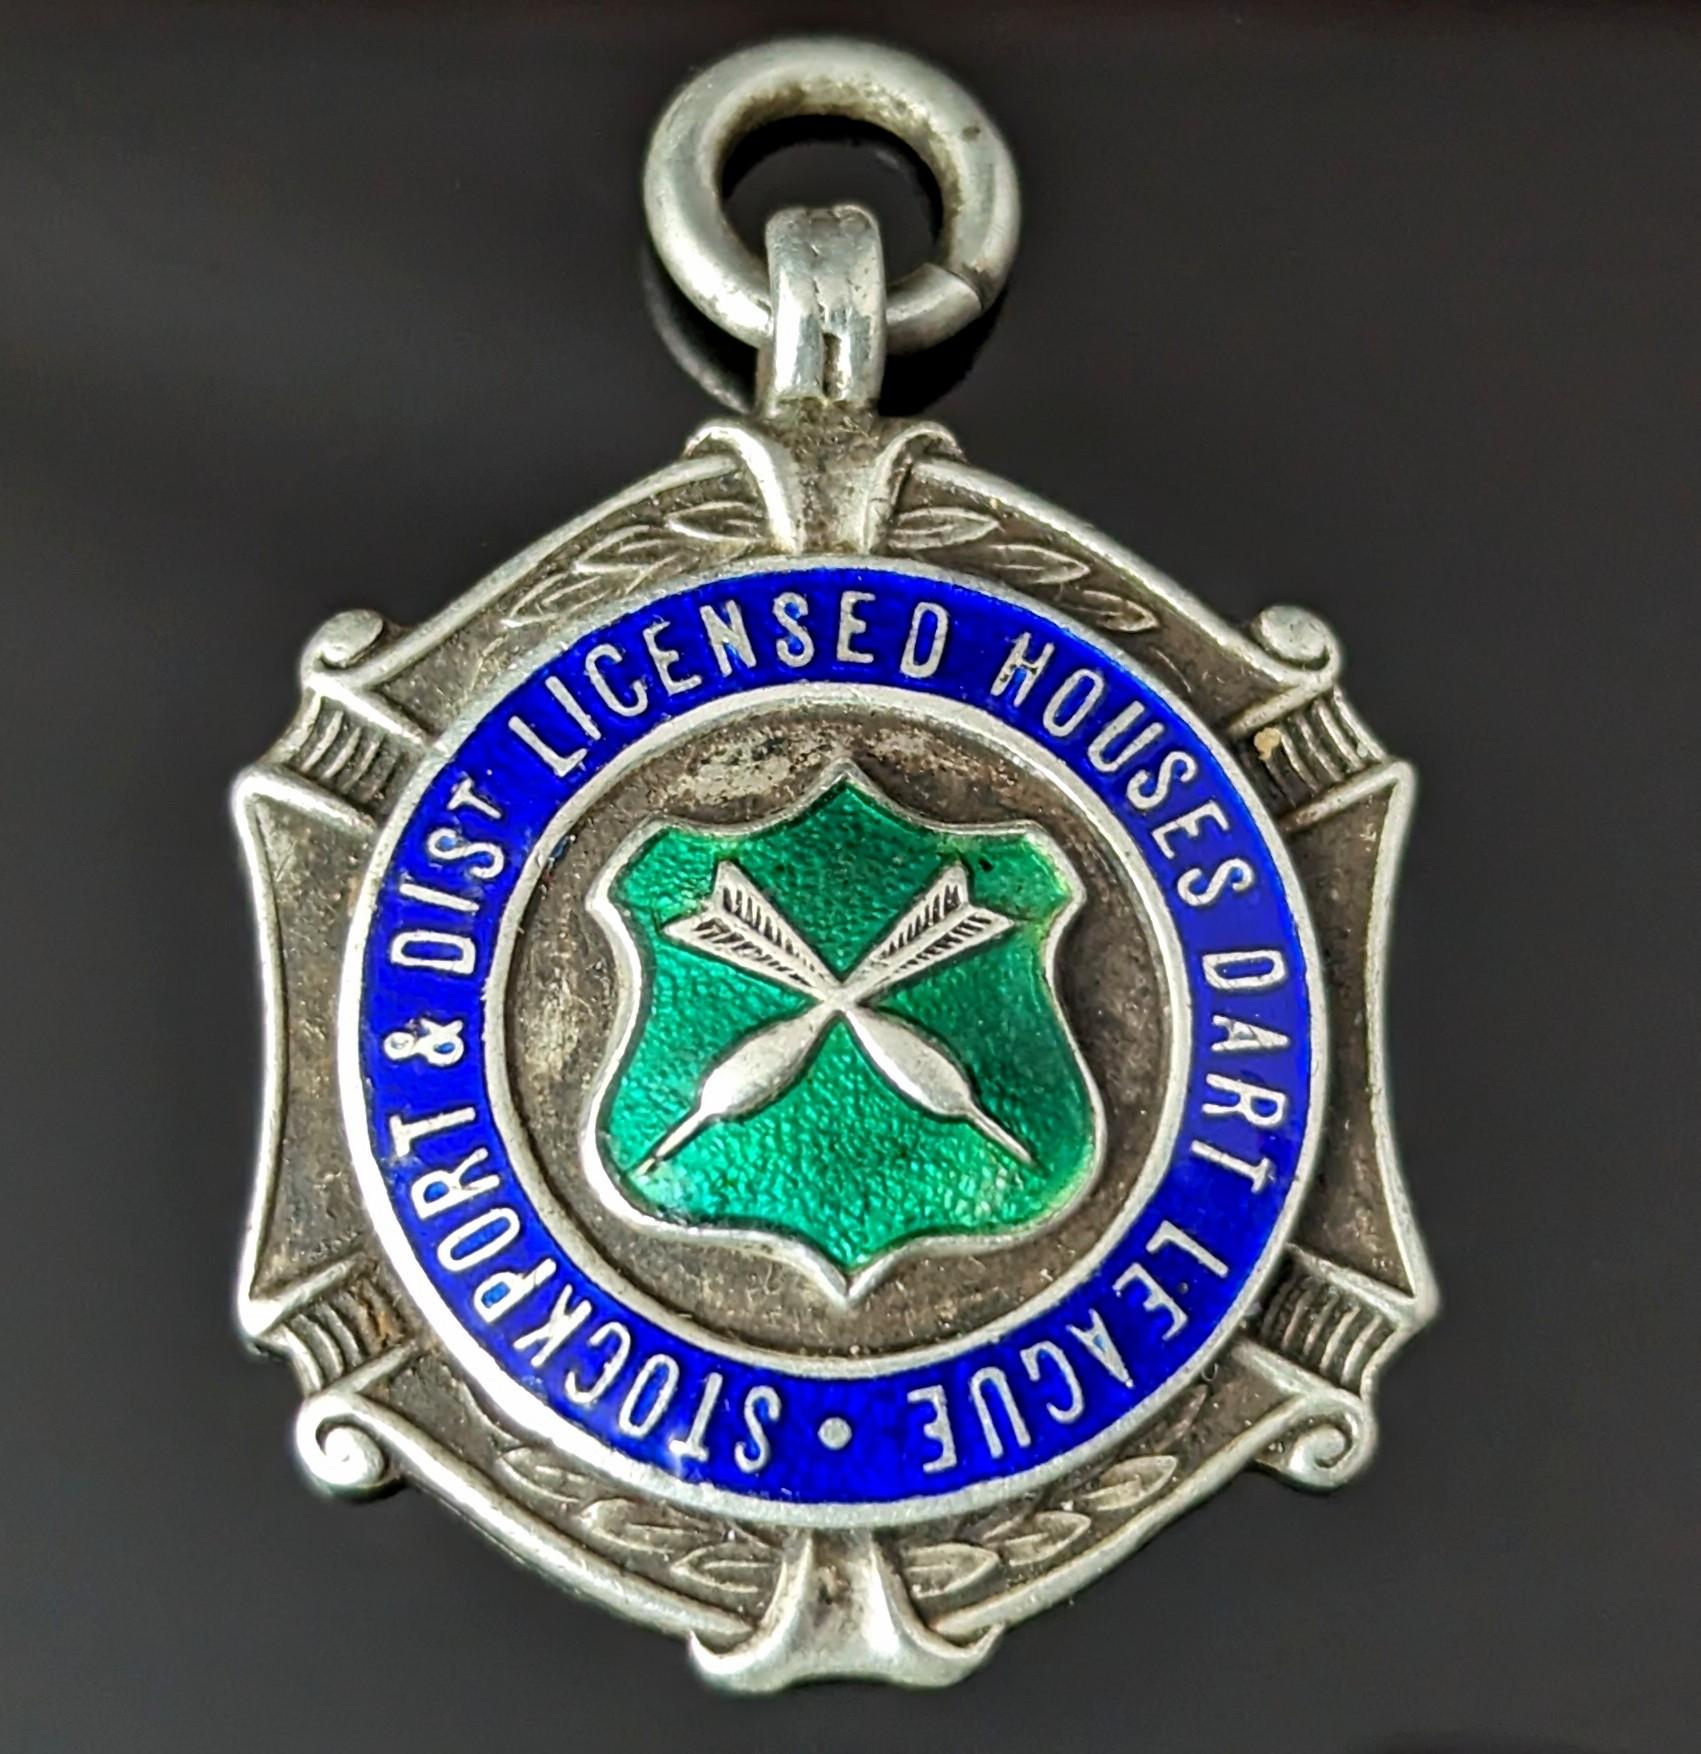 An attractive vintage sterling silver and enamel fob pendant.

It is a nicely shaped piece with an attractive blue and green enamelled design, the green enamel shield shaped centre depicting a pair of crossed Darts.

The text within the blue enamel